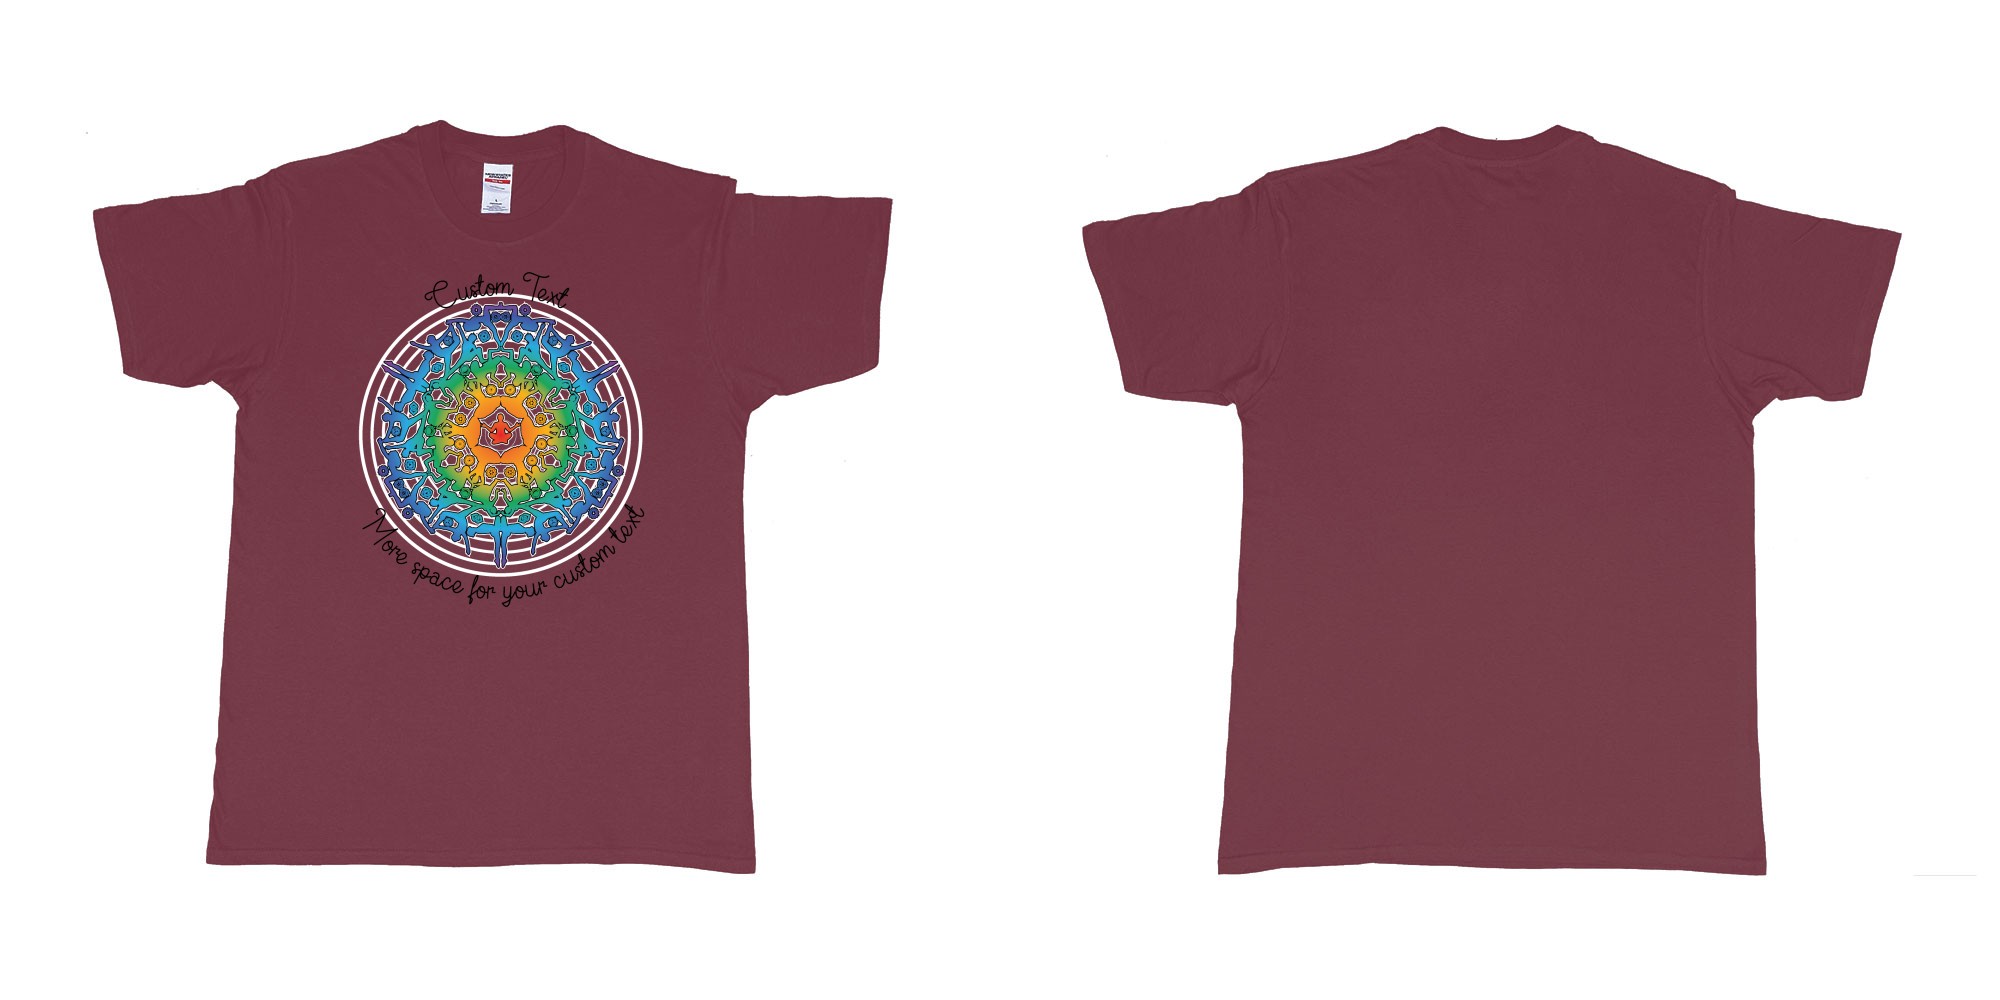 Custom tshirt design yoga mandala in fabric color marron choice your own text made in Bali by The Pirate Way